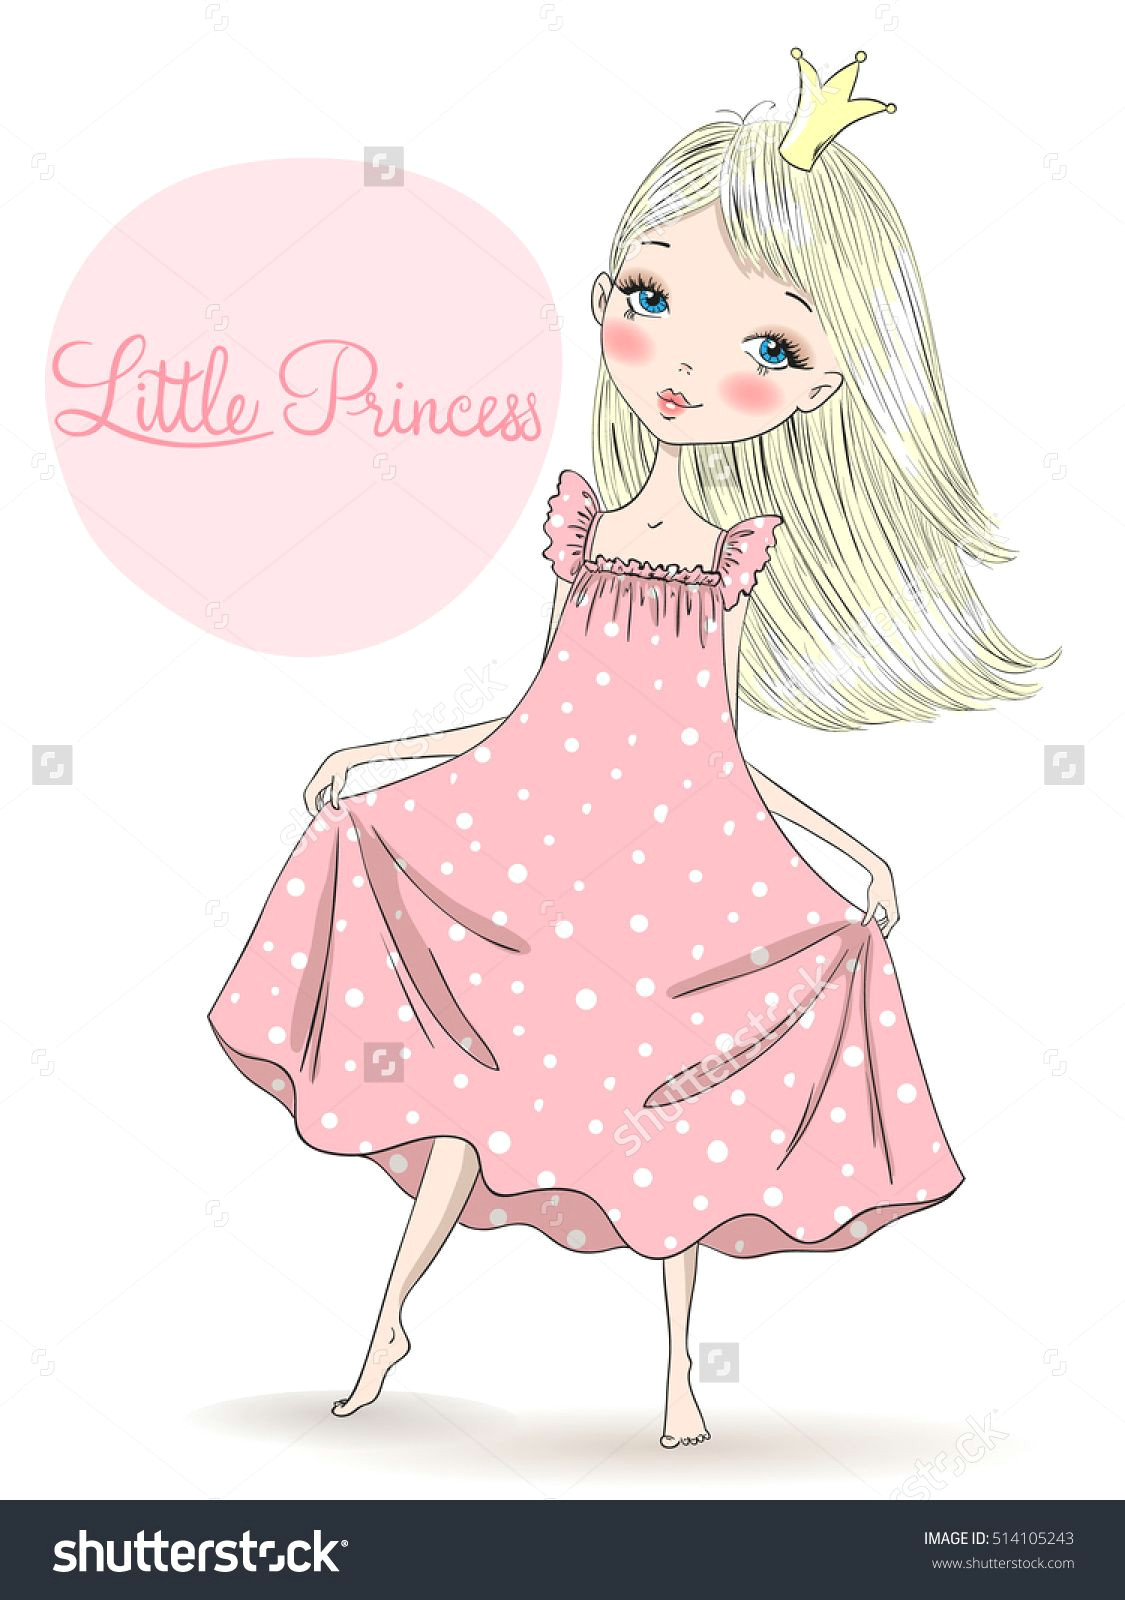 image result for cute nightdress clipart